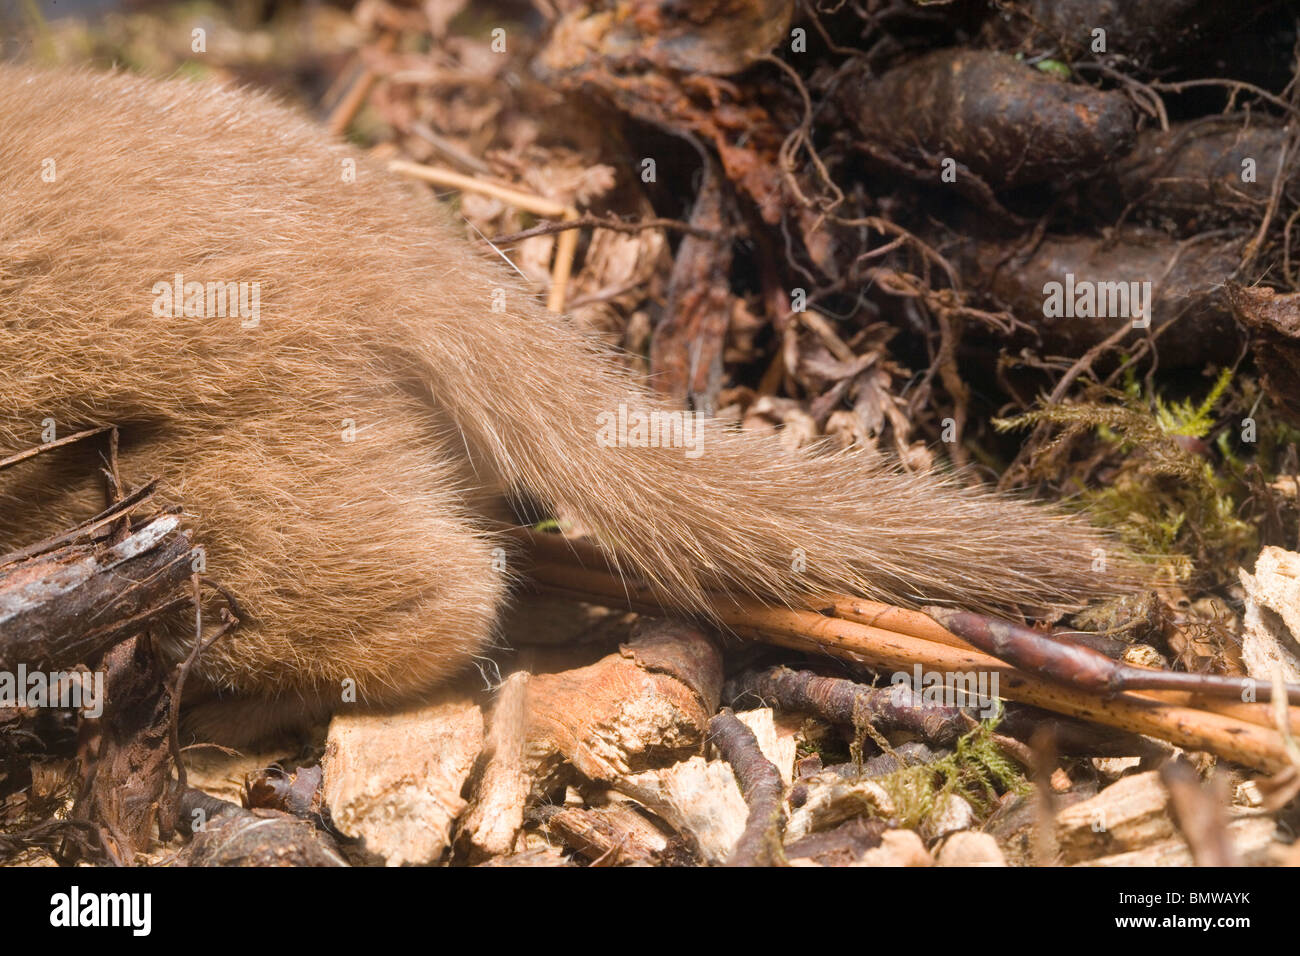 Weasel (Mustela nivalis).  Showing rear end of a living animal with tail. Compare with that of a Stoat (Mustela erminea). Stock Photo